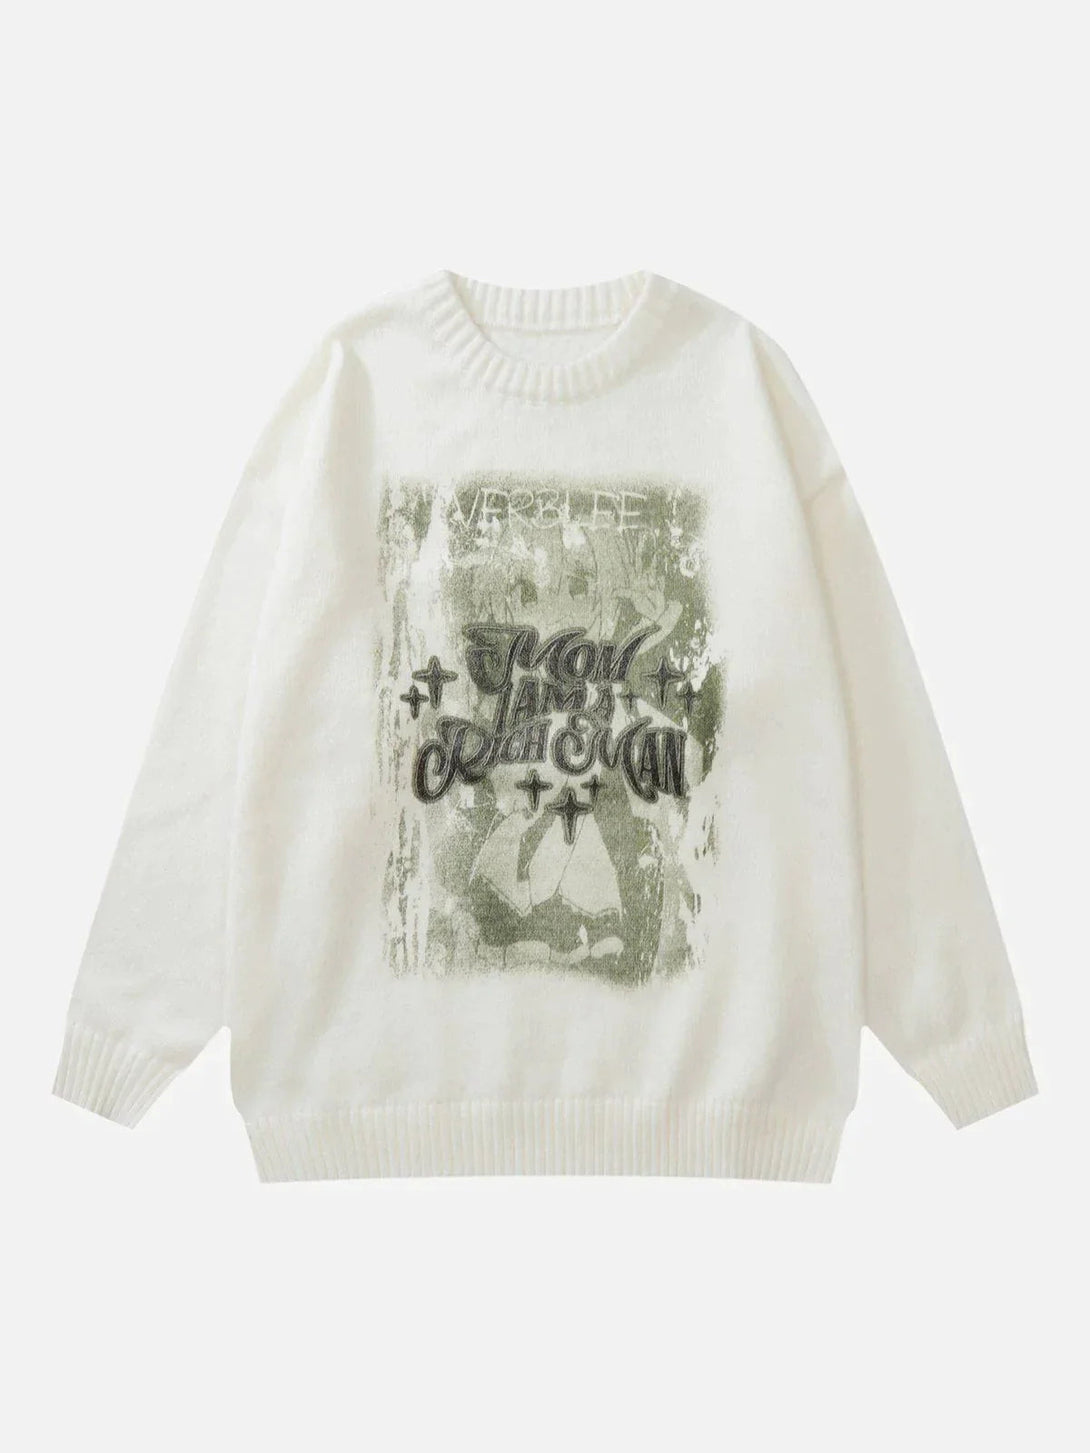 Majesda® - Vintage Letters Print Sweater outfit ideas streetwear fashion